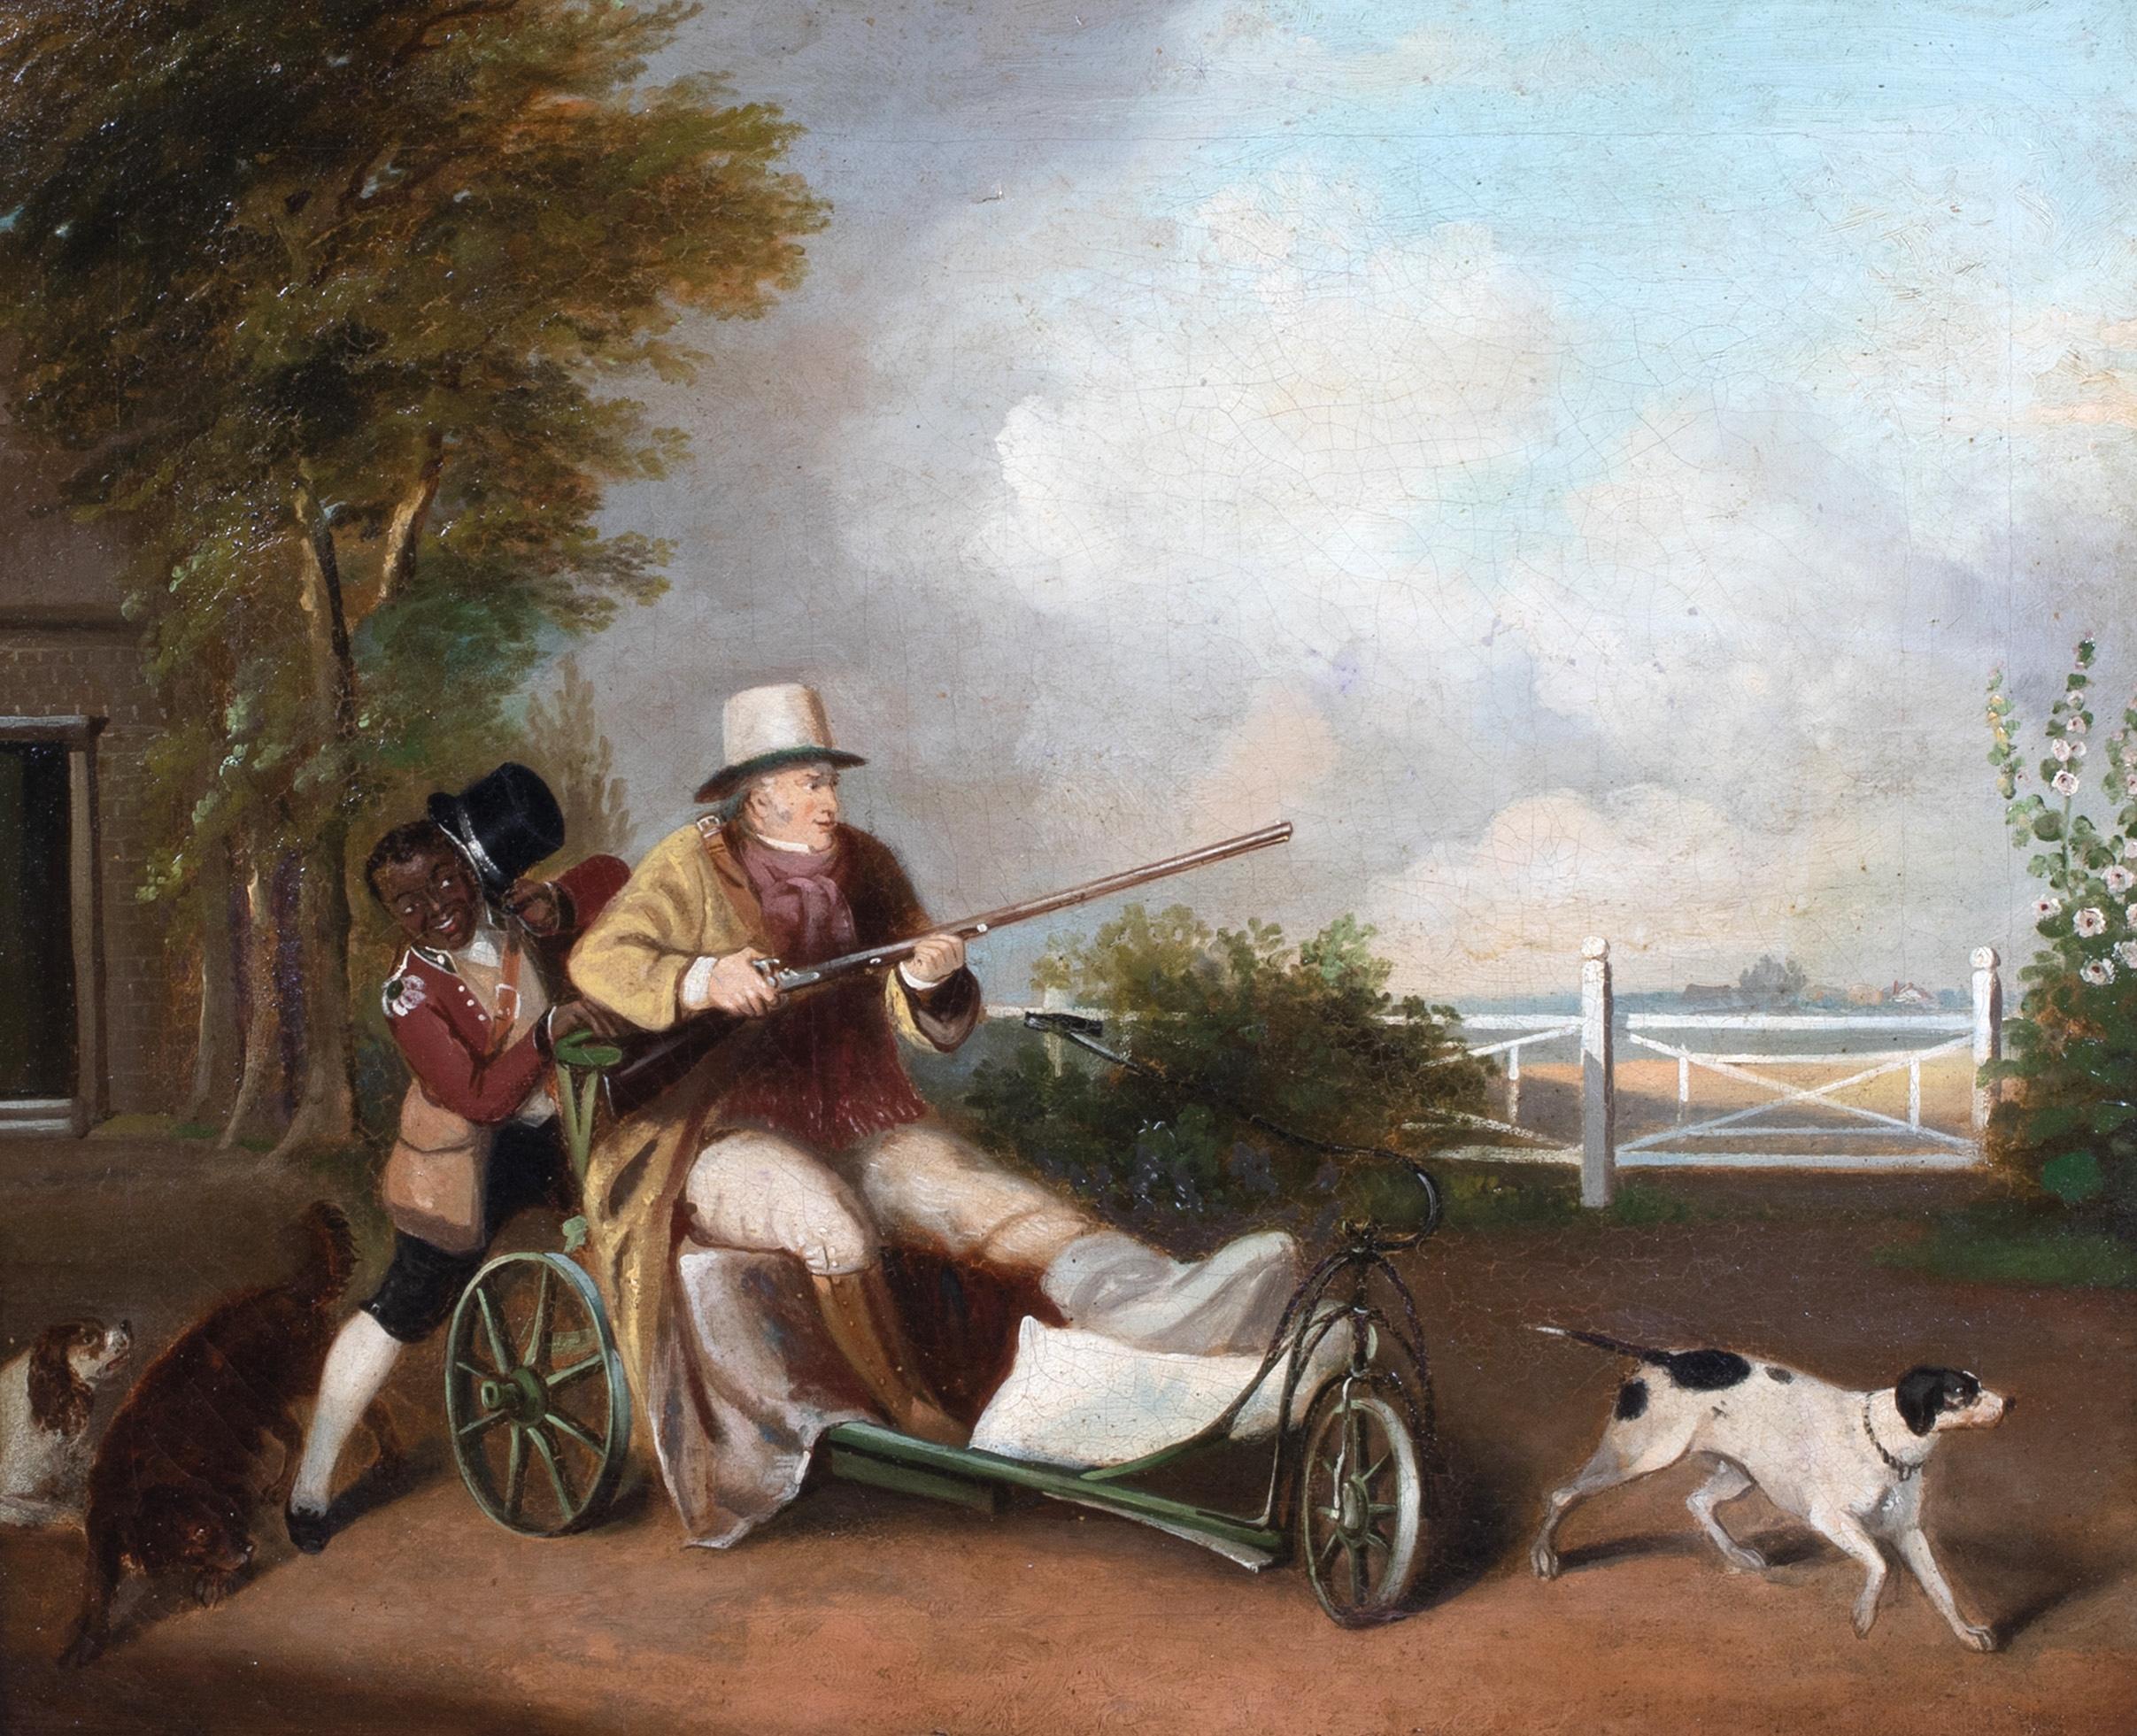 Unknown Portrait Painting - A Landowner, Servant & Dogs - Before the Hunt, 19th Century 